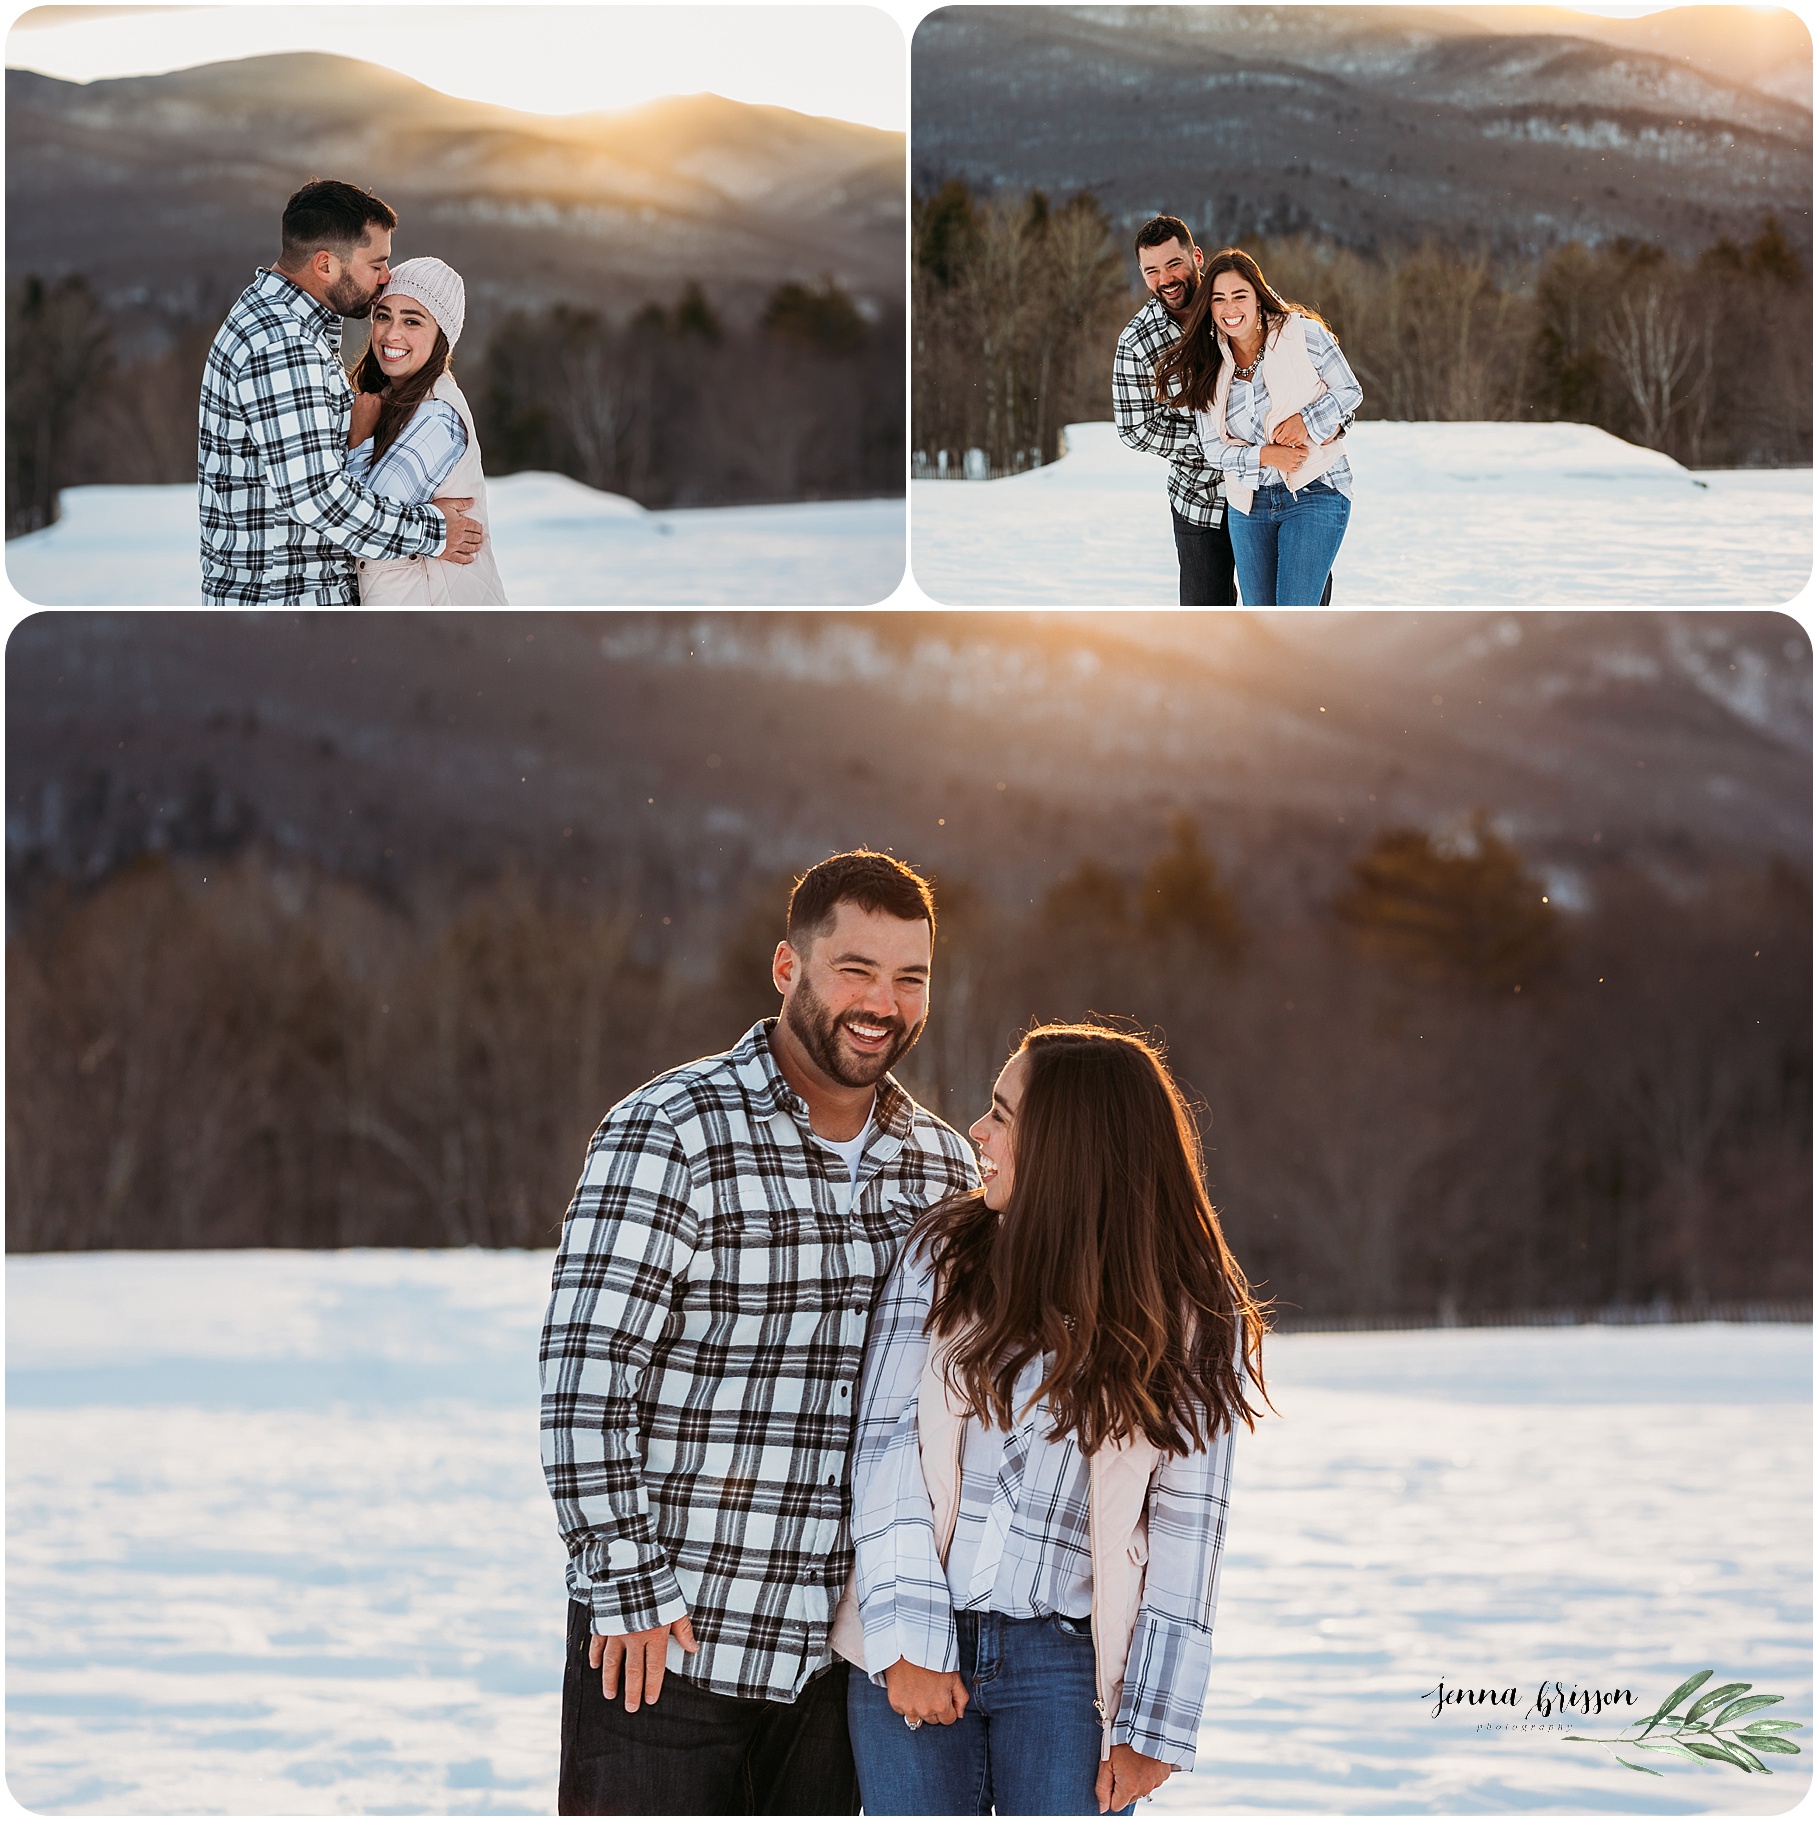 Candid Fun Snowy Vermont Couple Photography Session